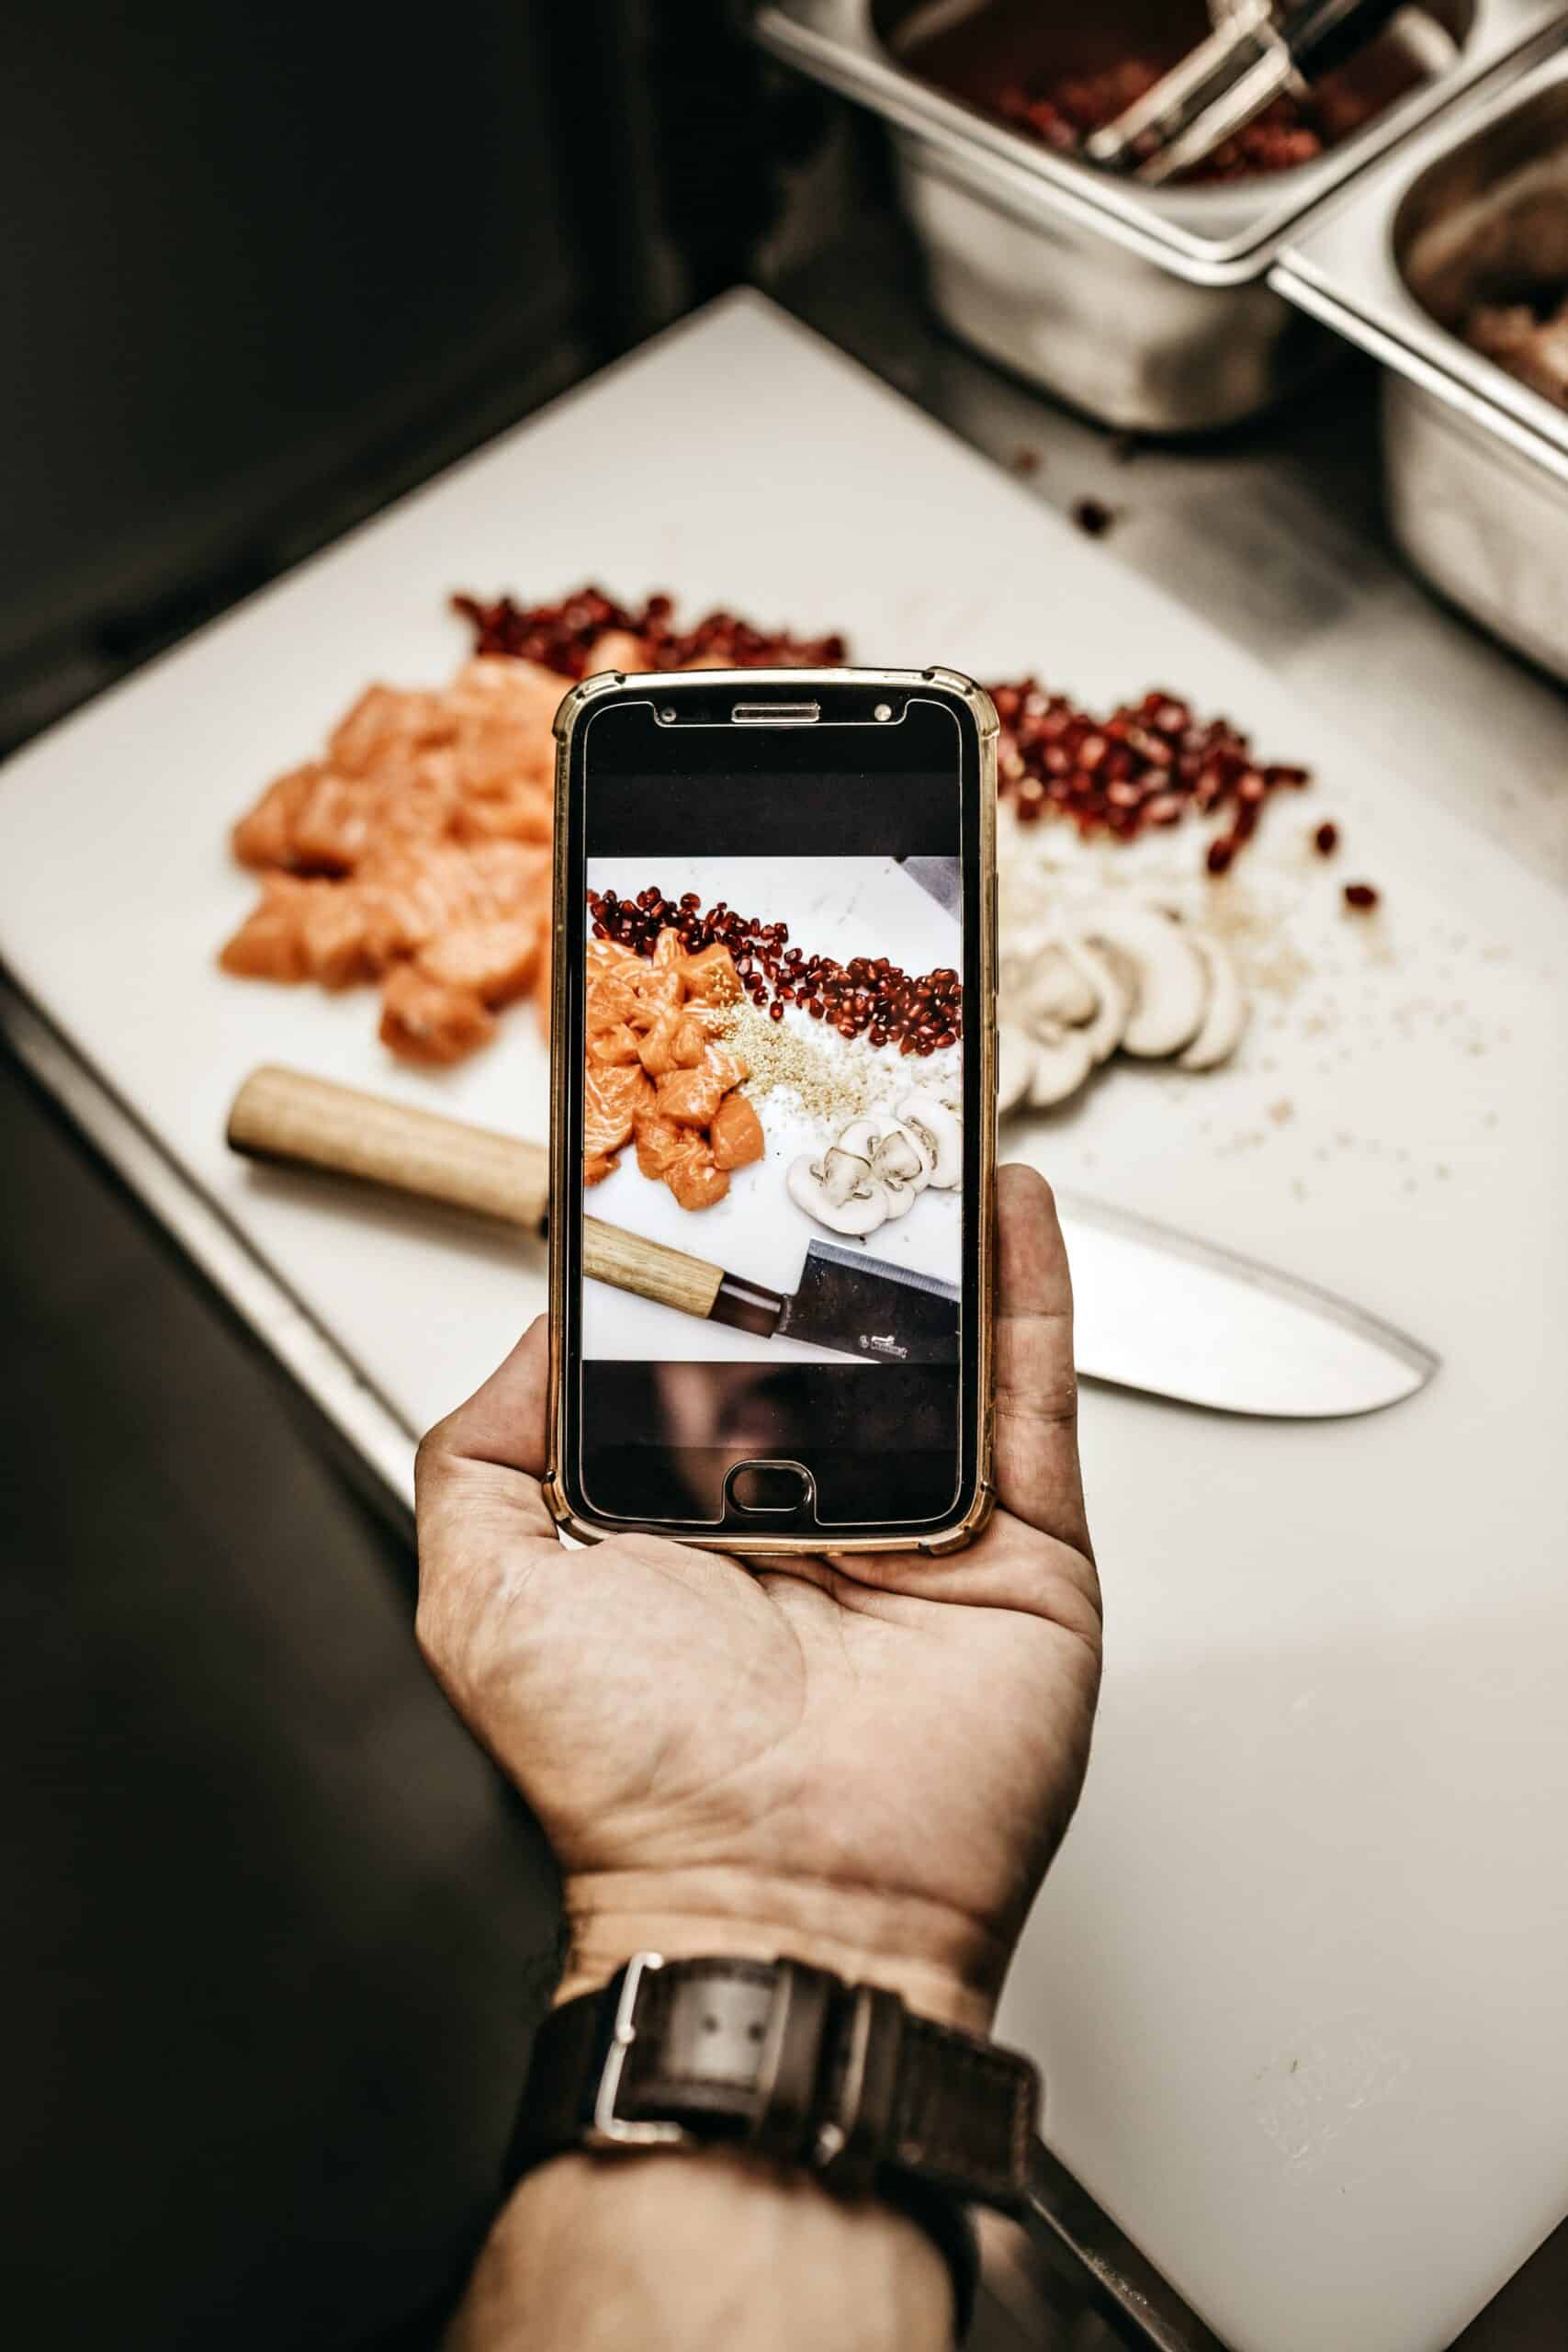 Taking picture of food